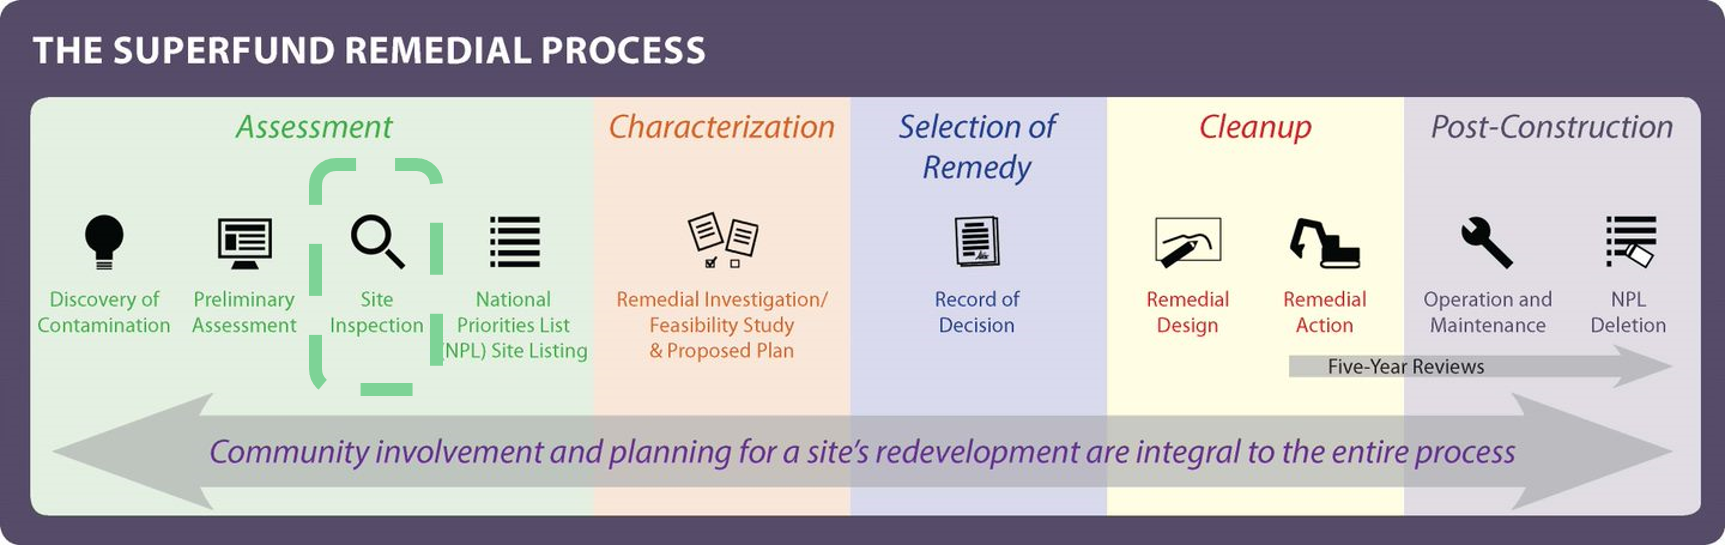 Superfund Remedial Process Timeline with Site Inspection Phase highlighted. 